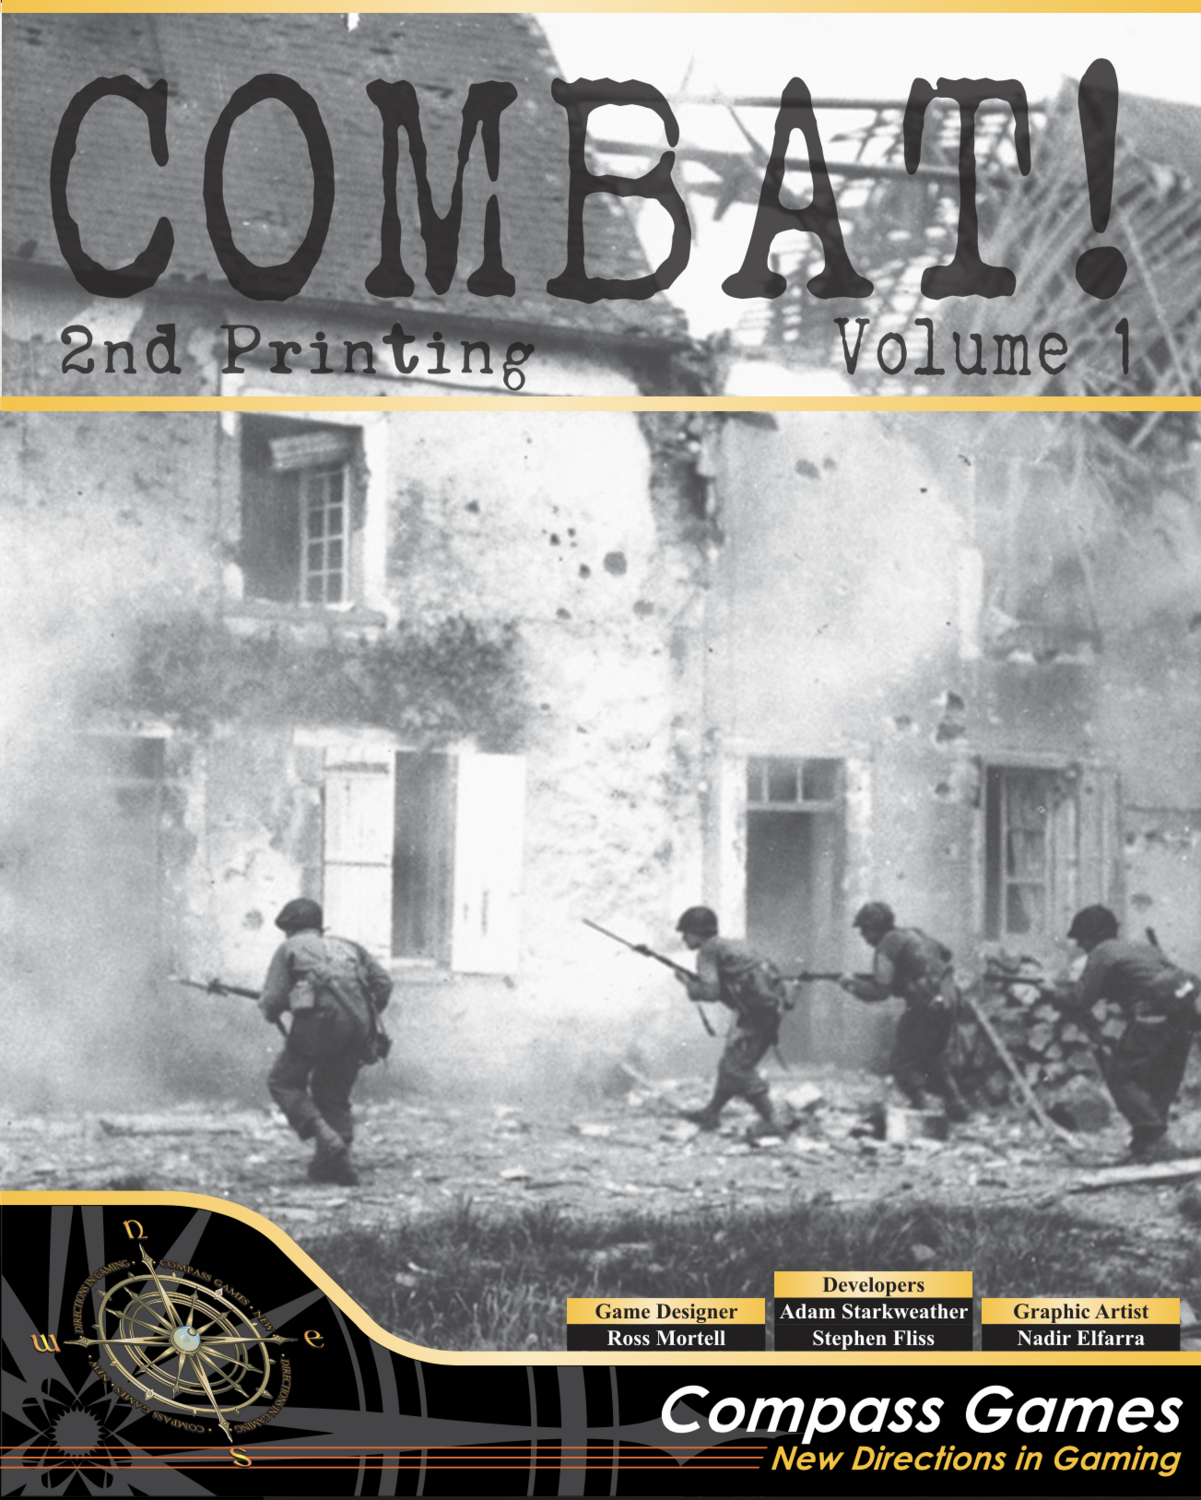 Combat! Volume 1, 2nd Printing (Solitaire)